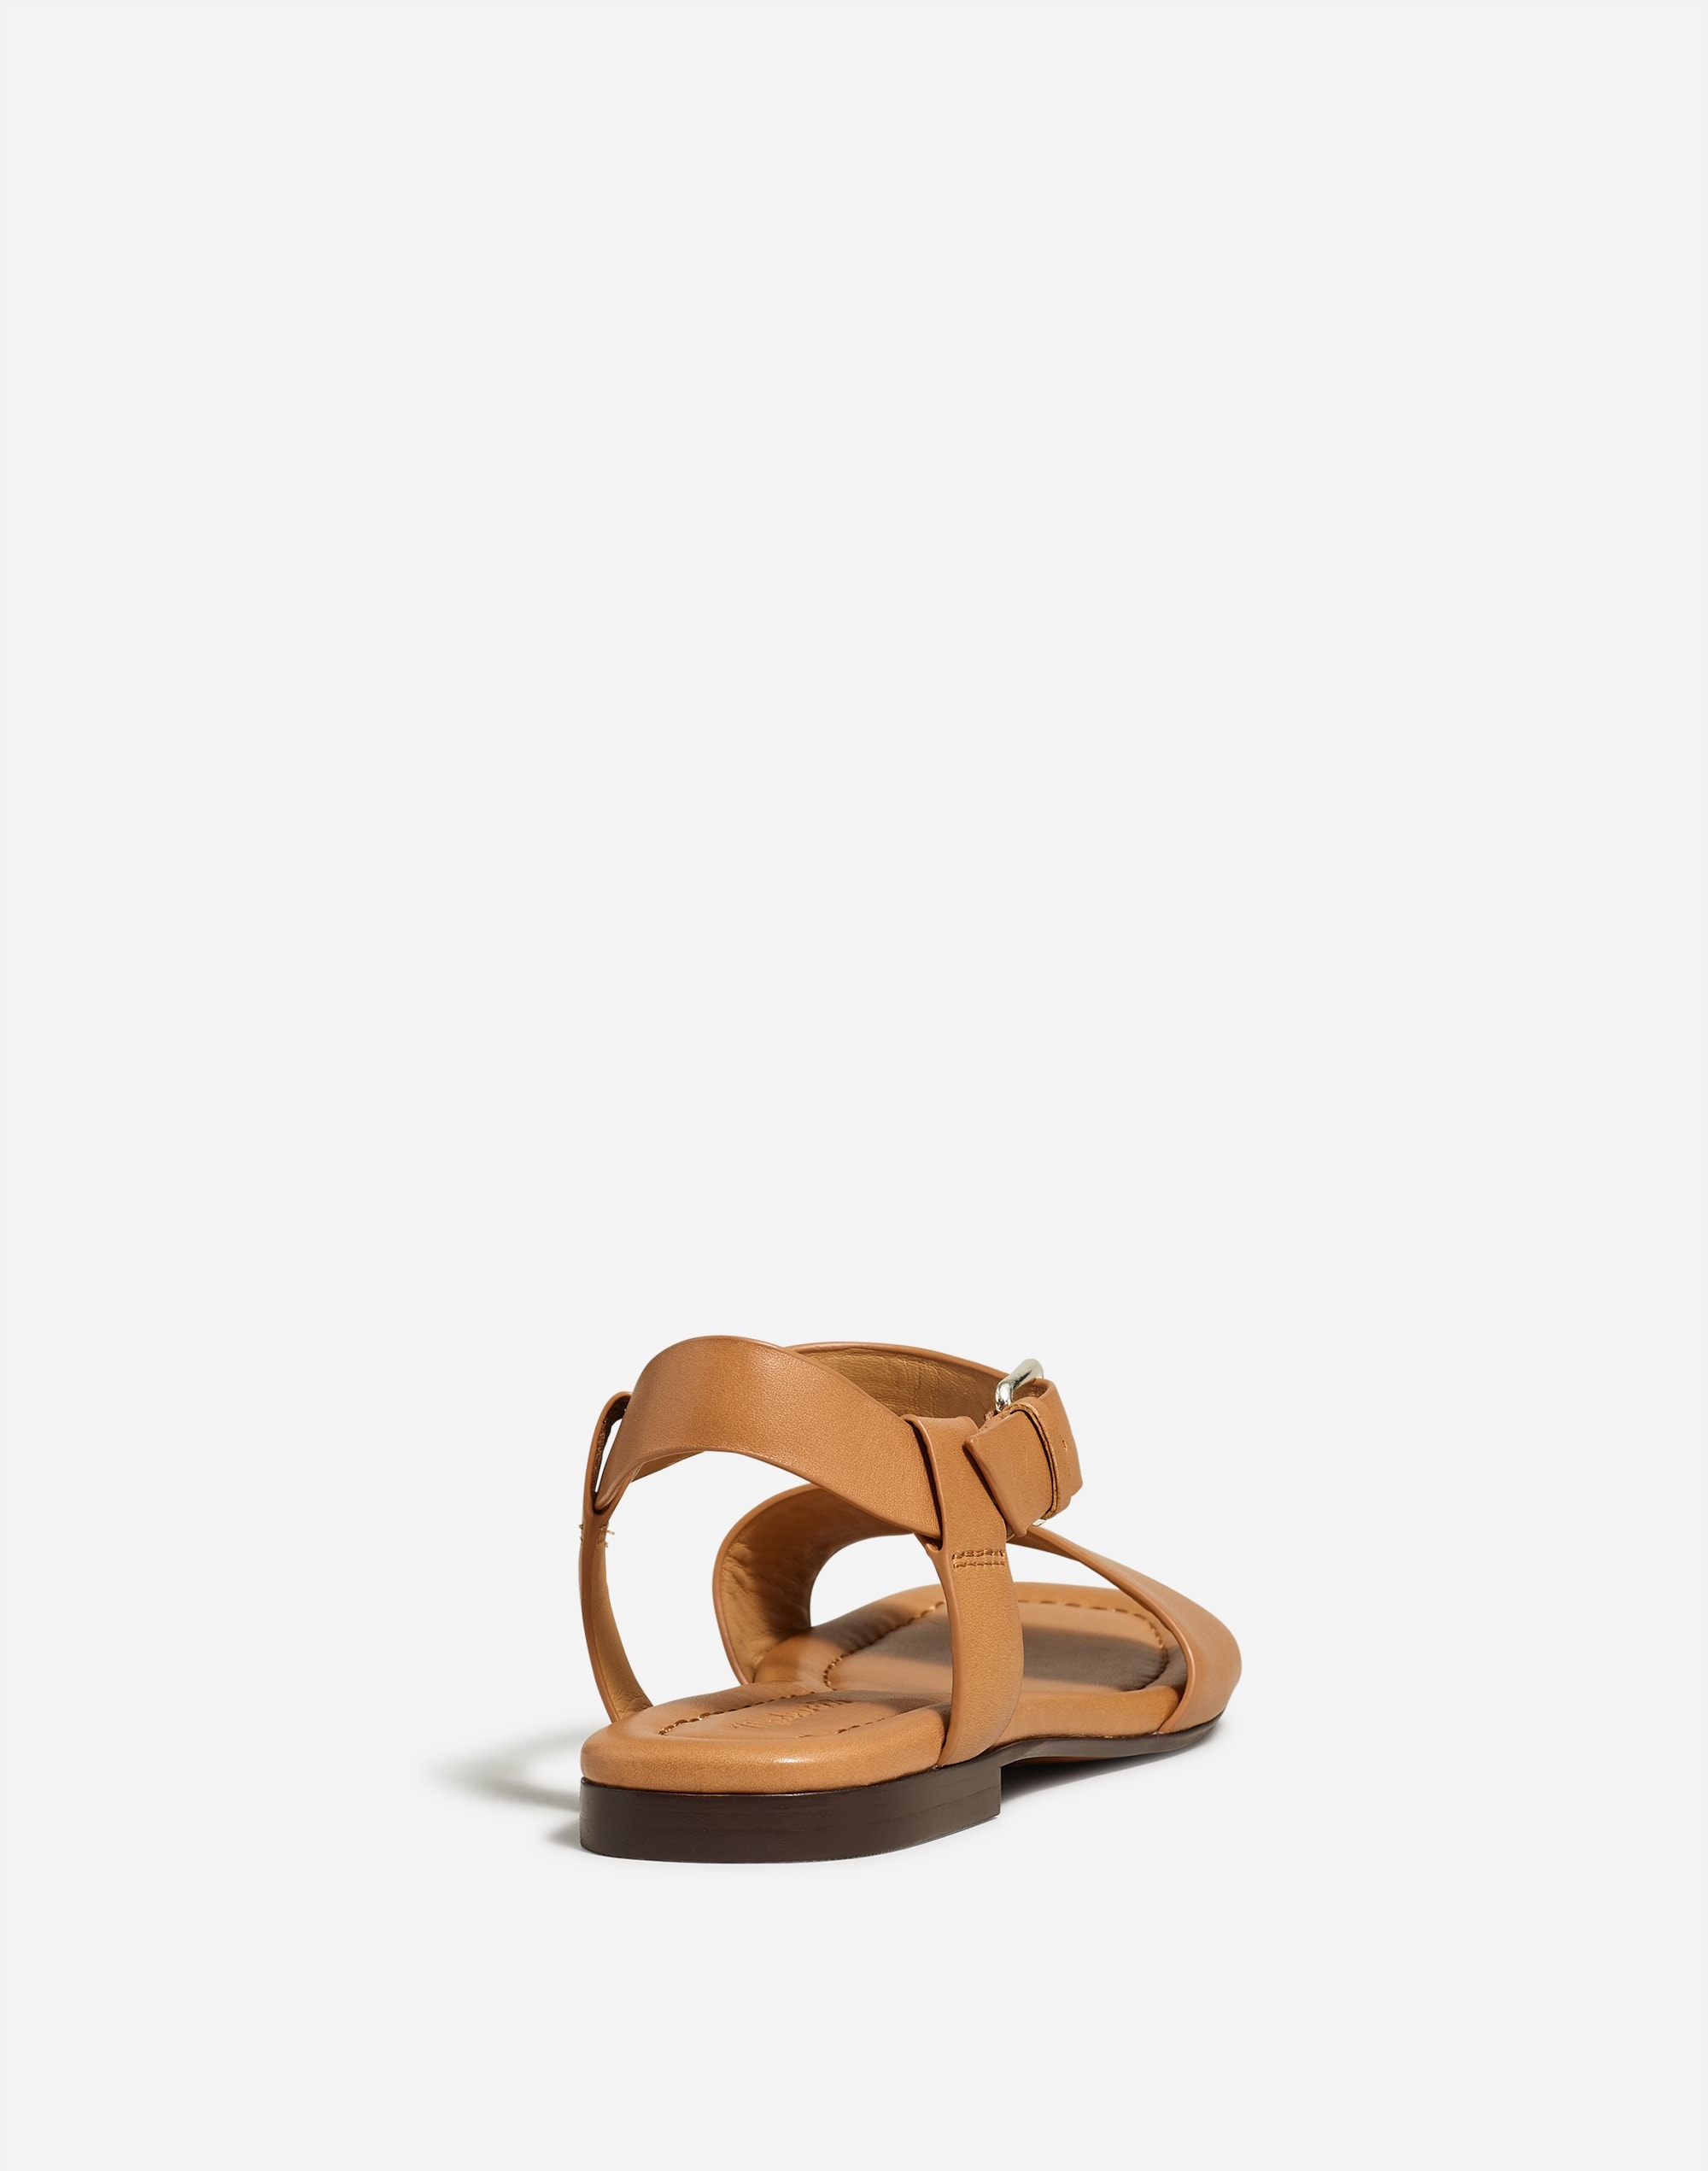 The Karla Ankle-Strap Sandal Leather